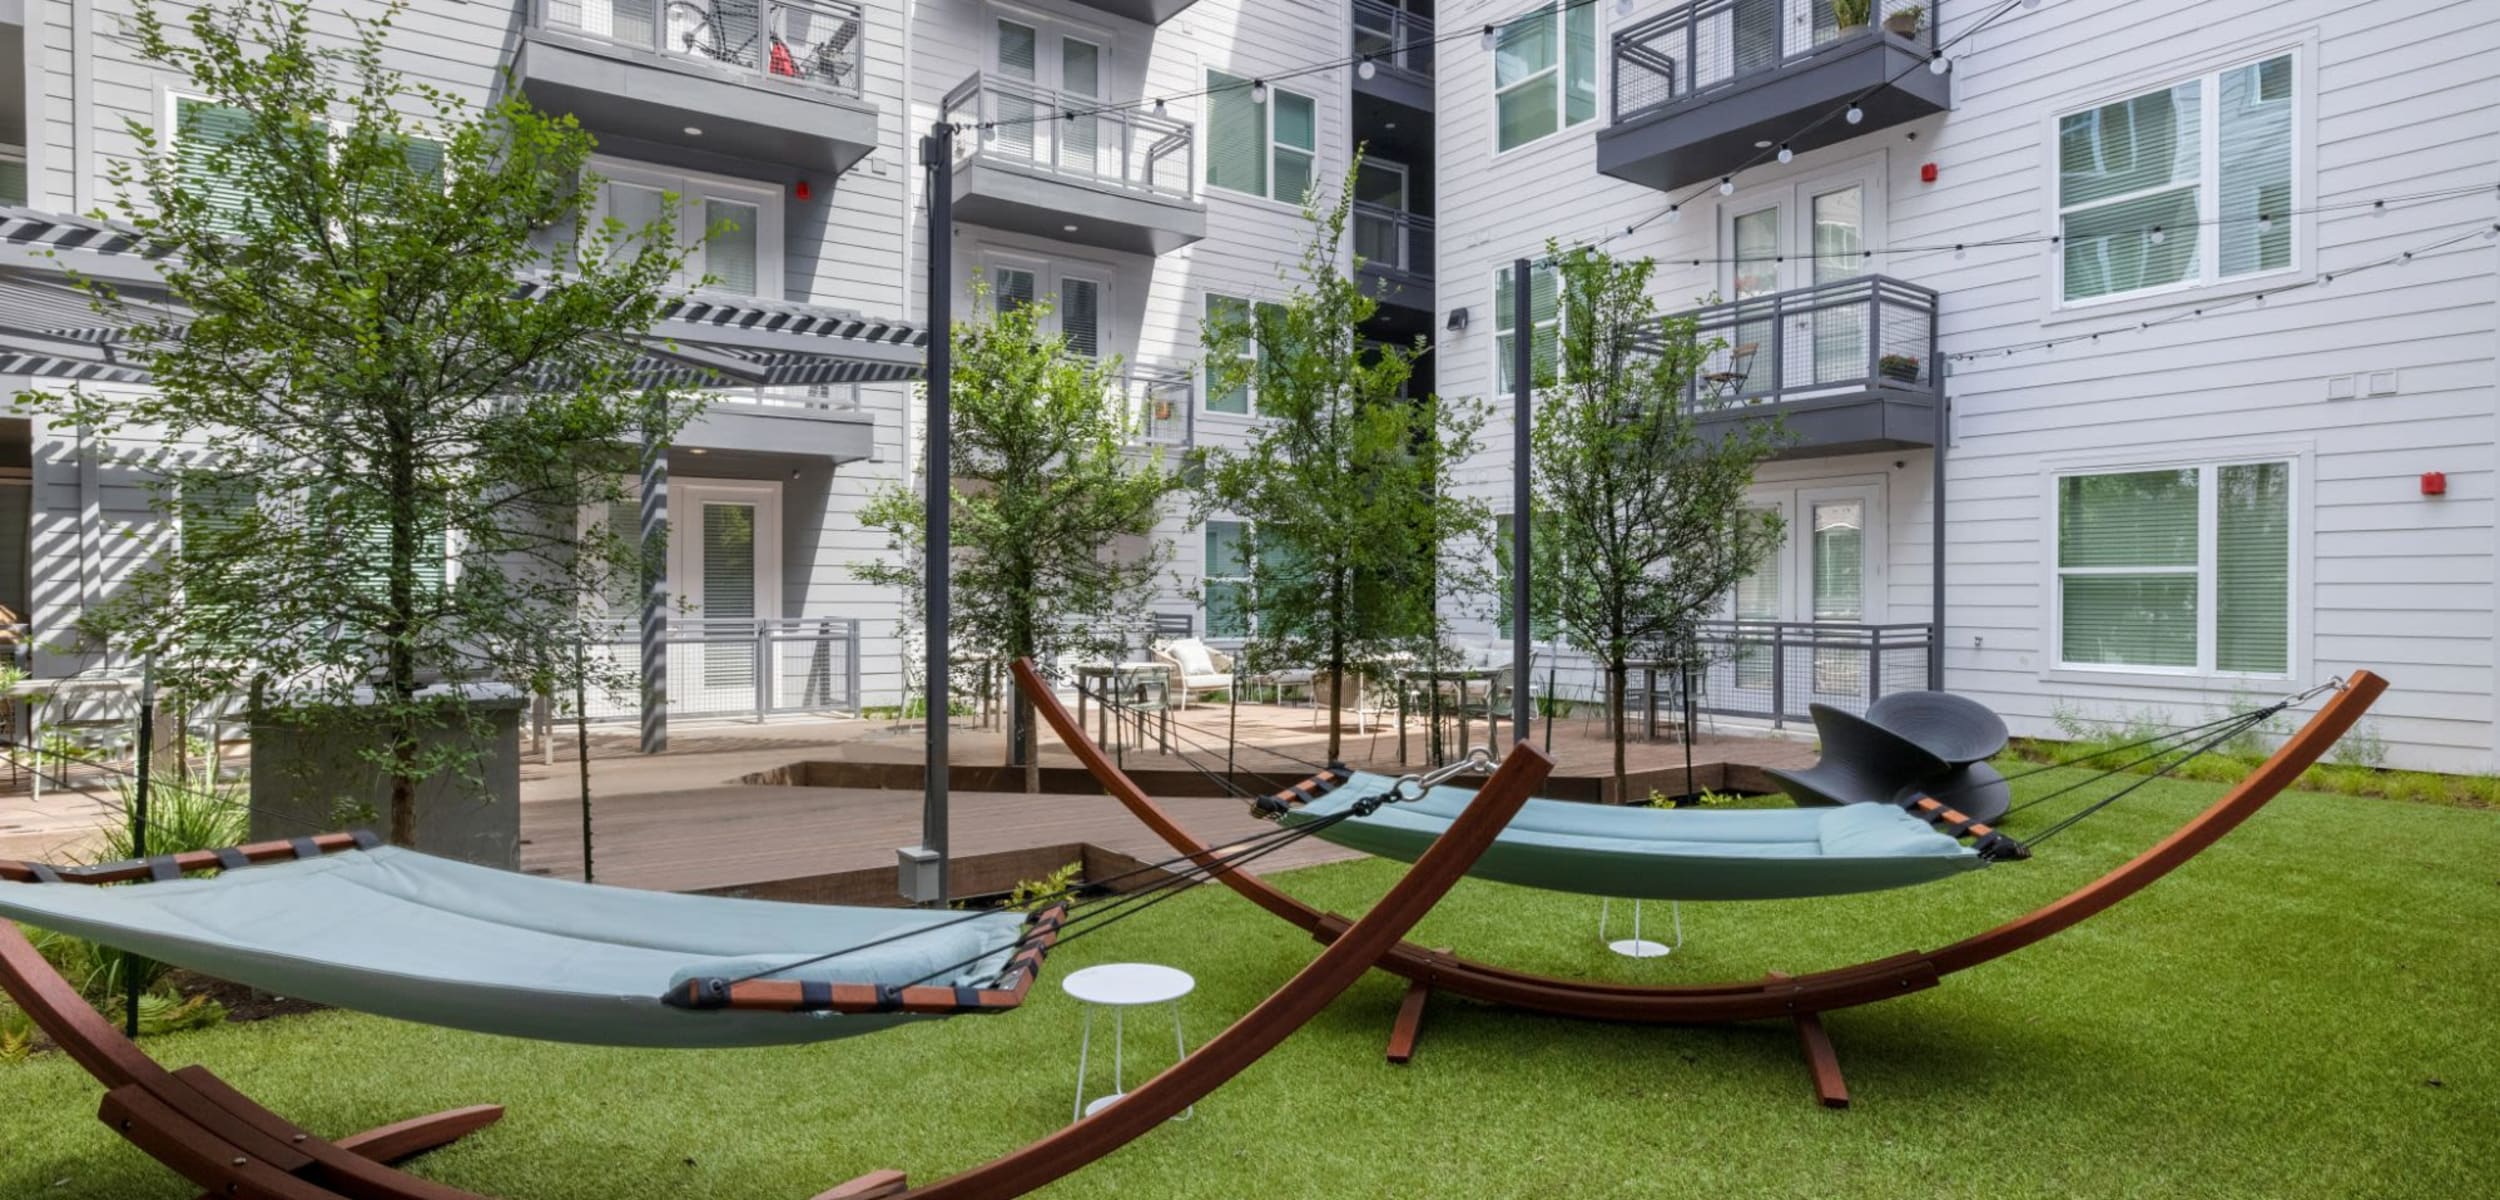 Courtyard area with hammocks at 44 South in Austin, Texas